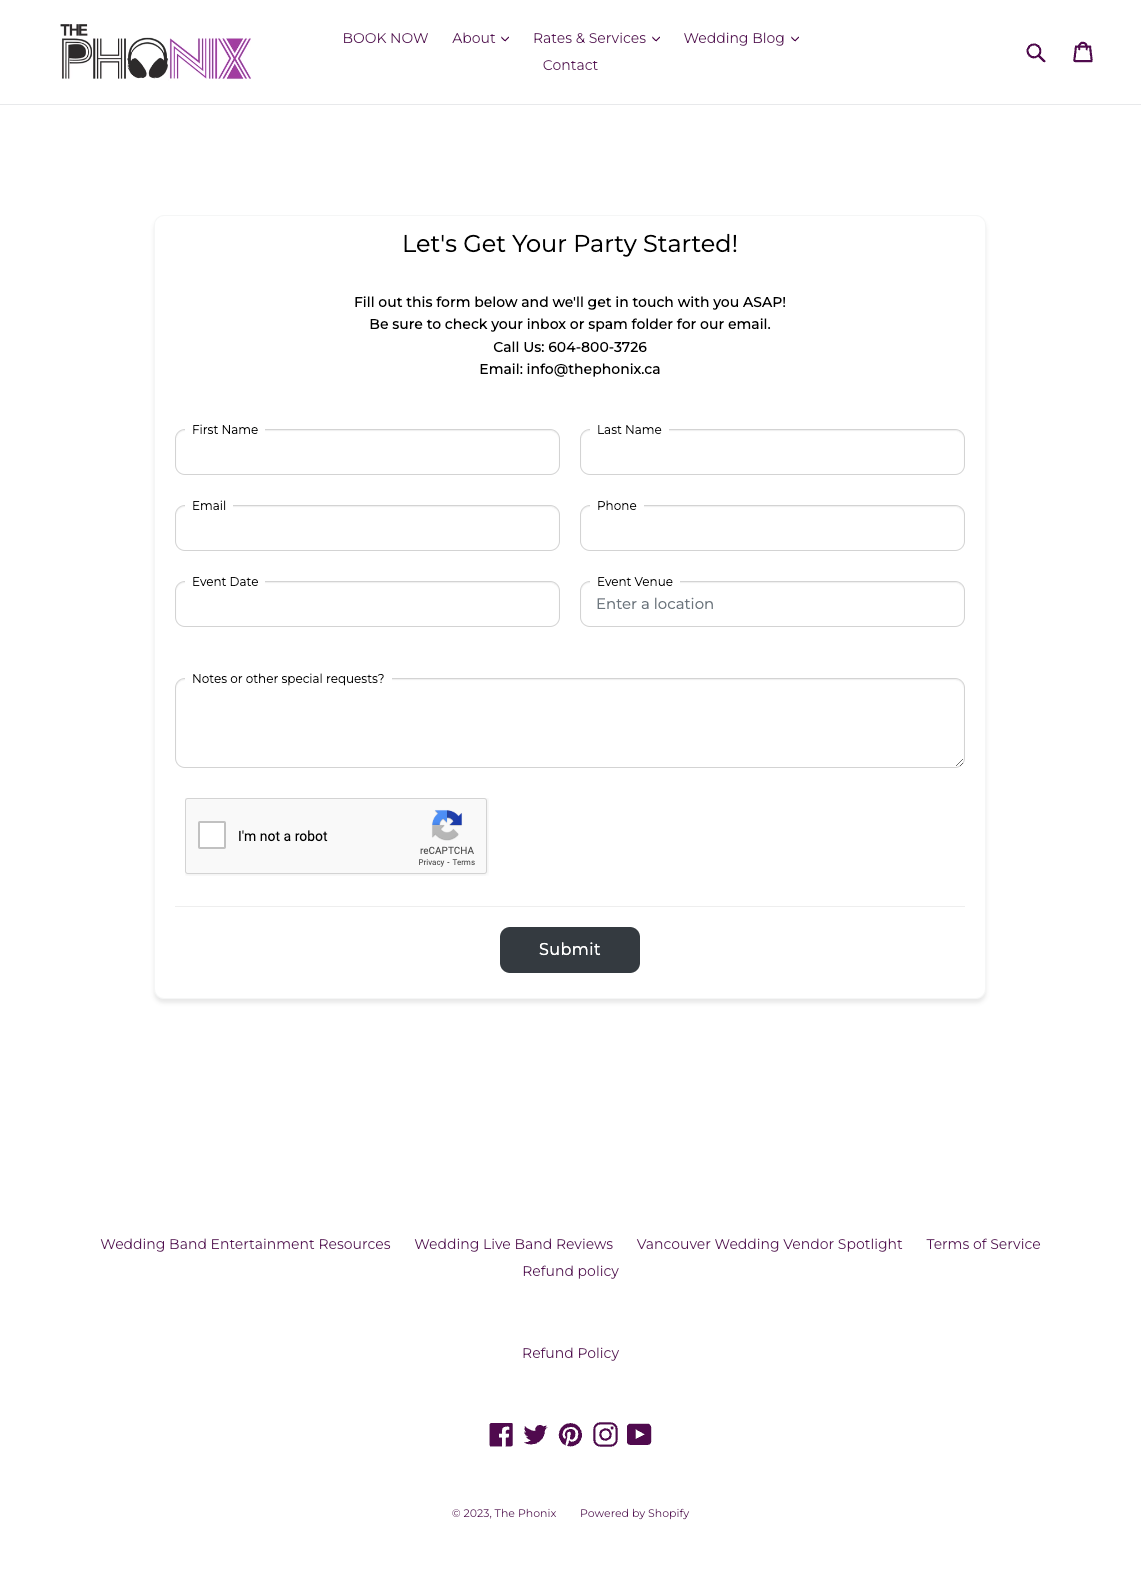 Best way to get band gigs through your website contact form